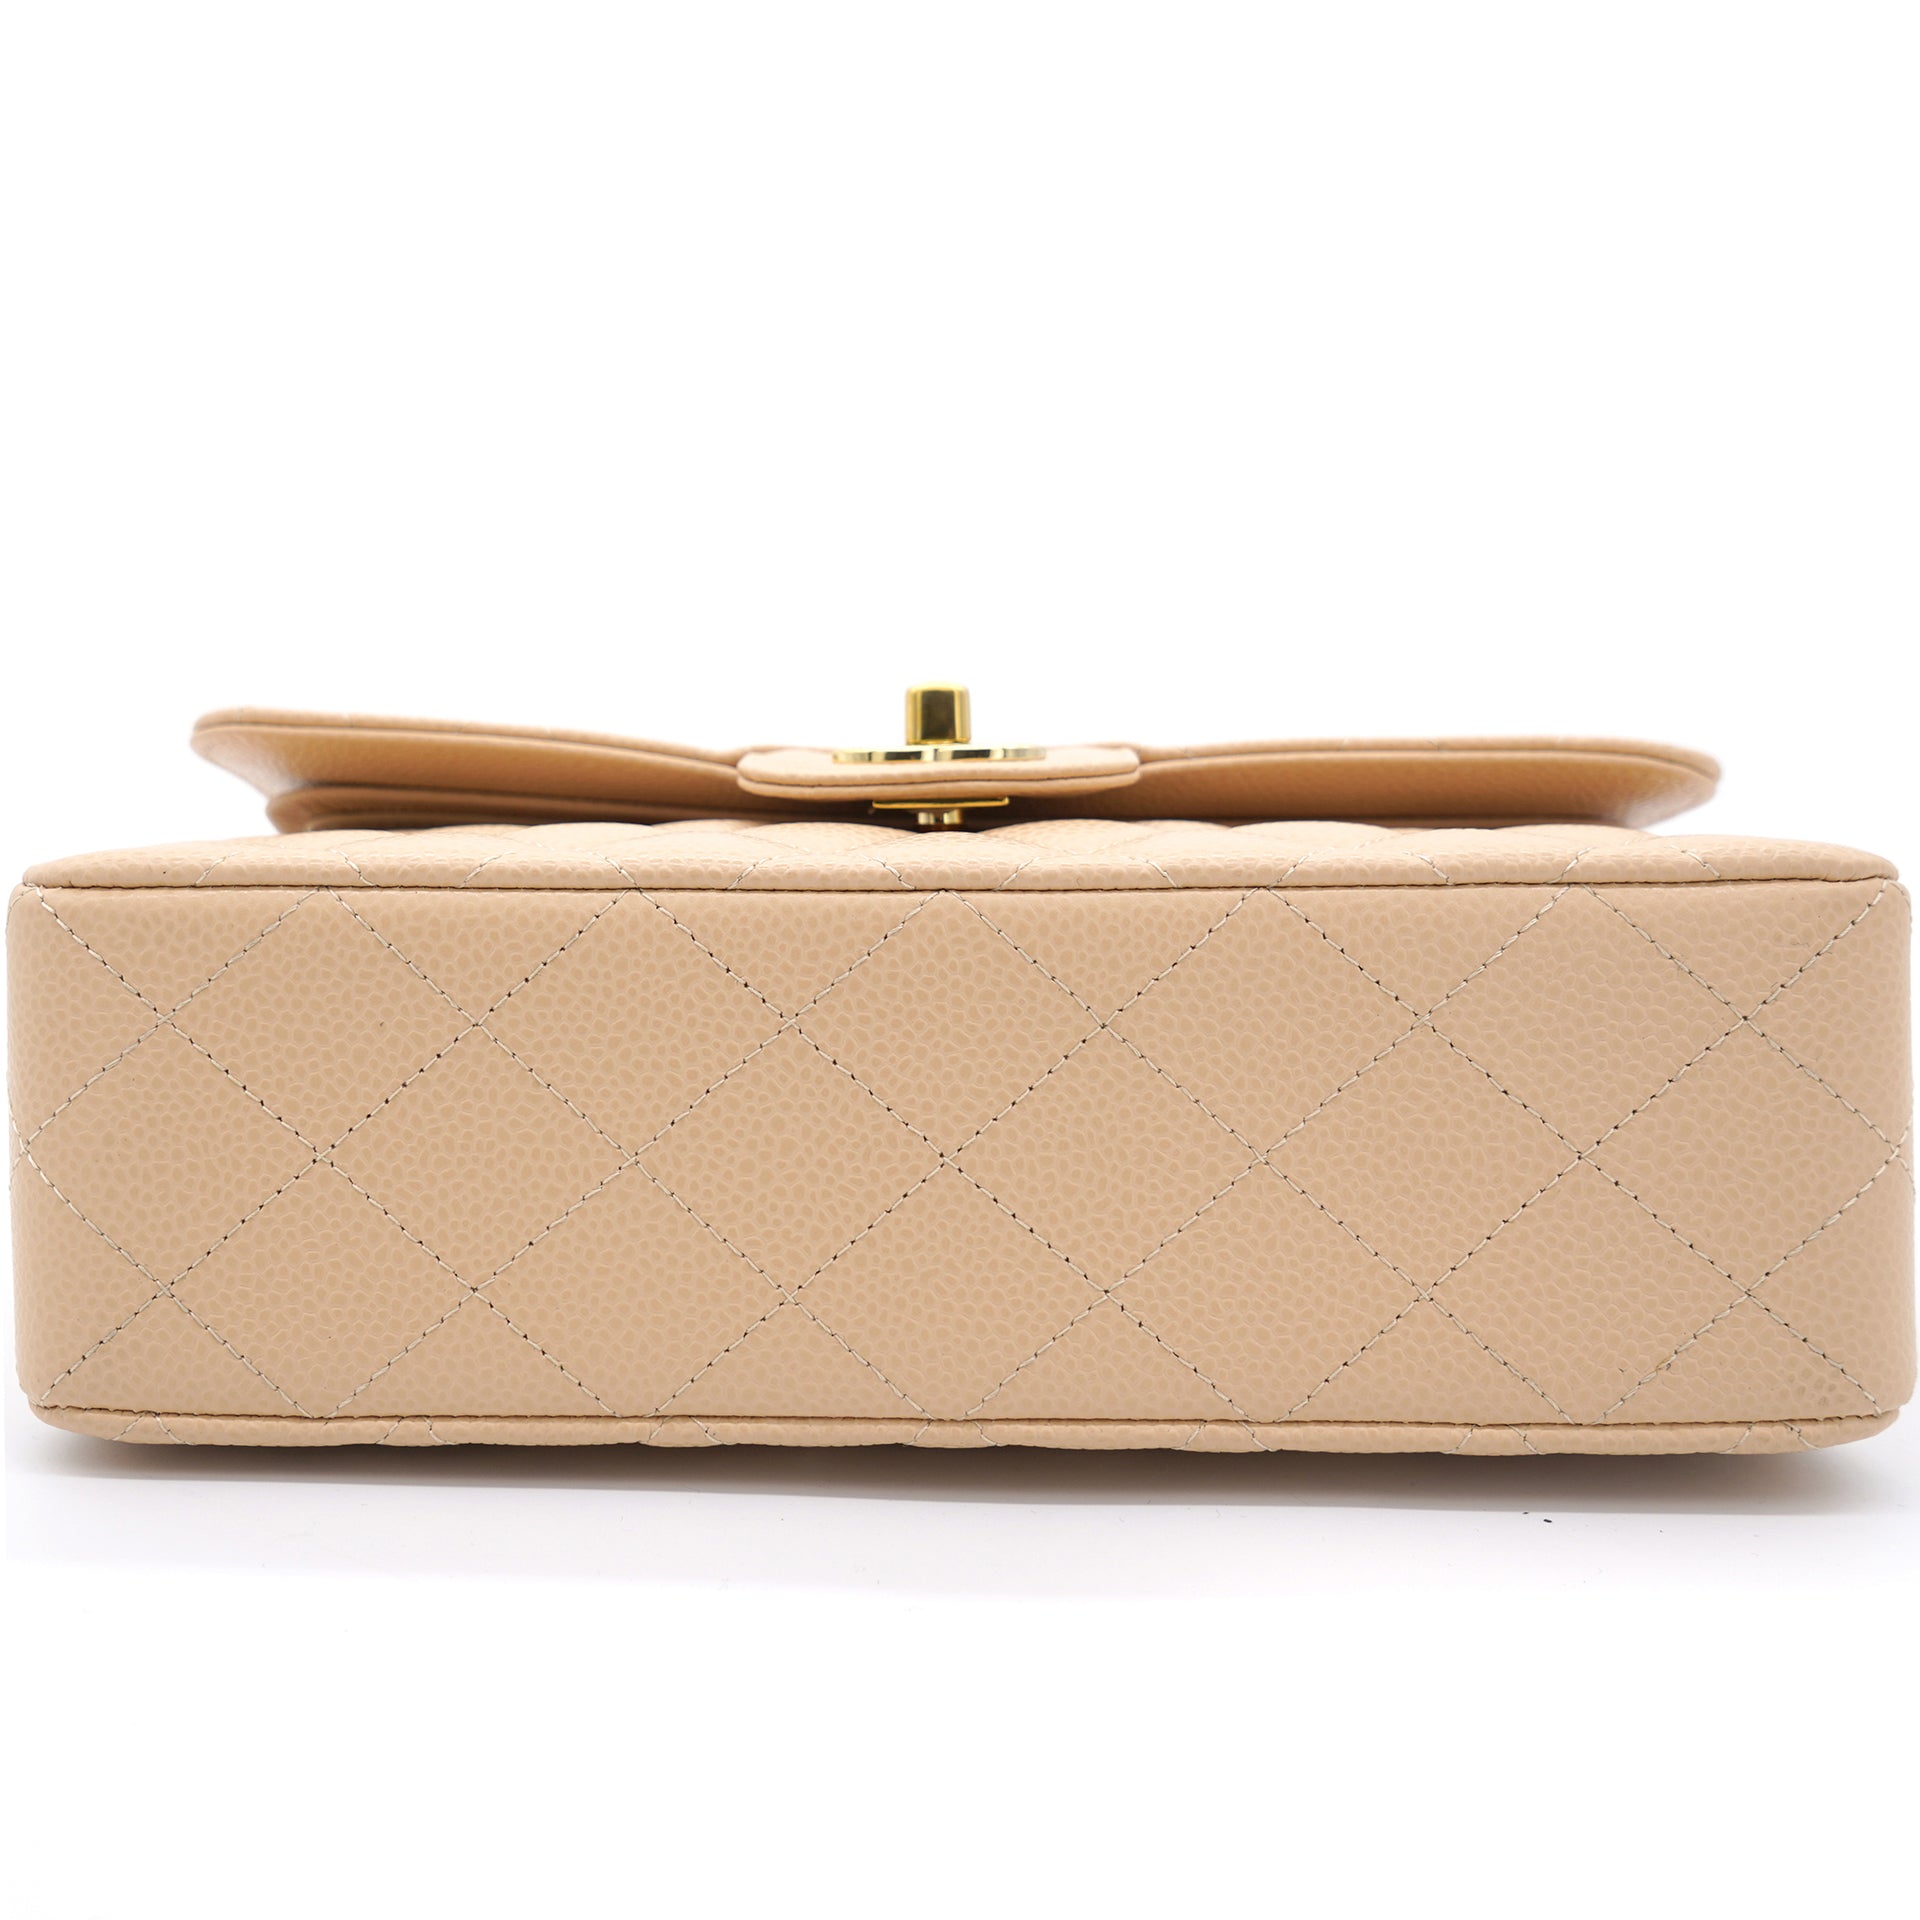 Caviar Quilted Small Double Flap Beige Clair